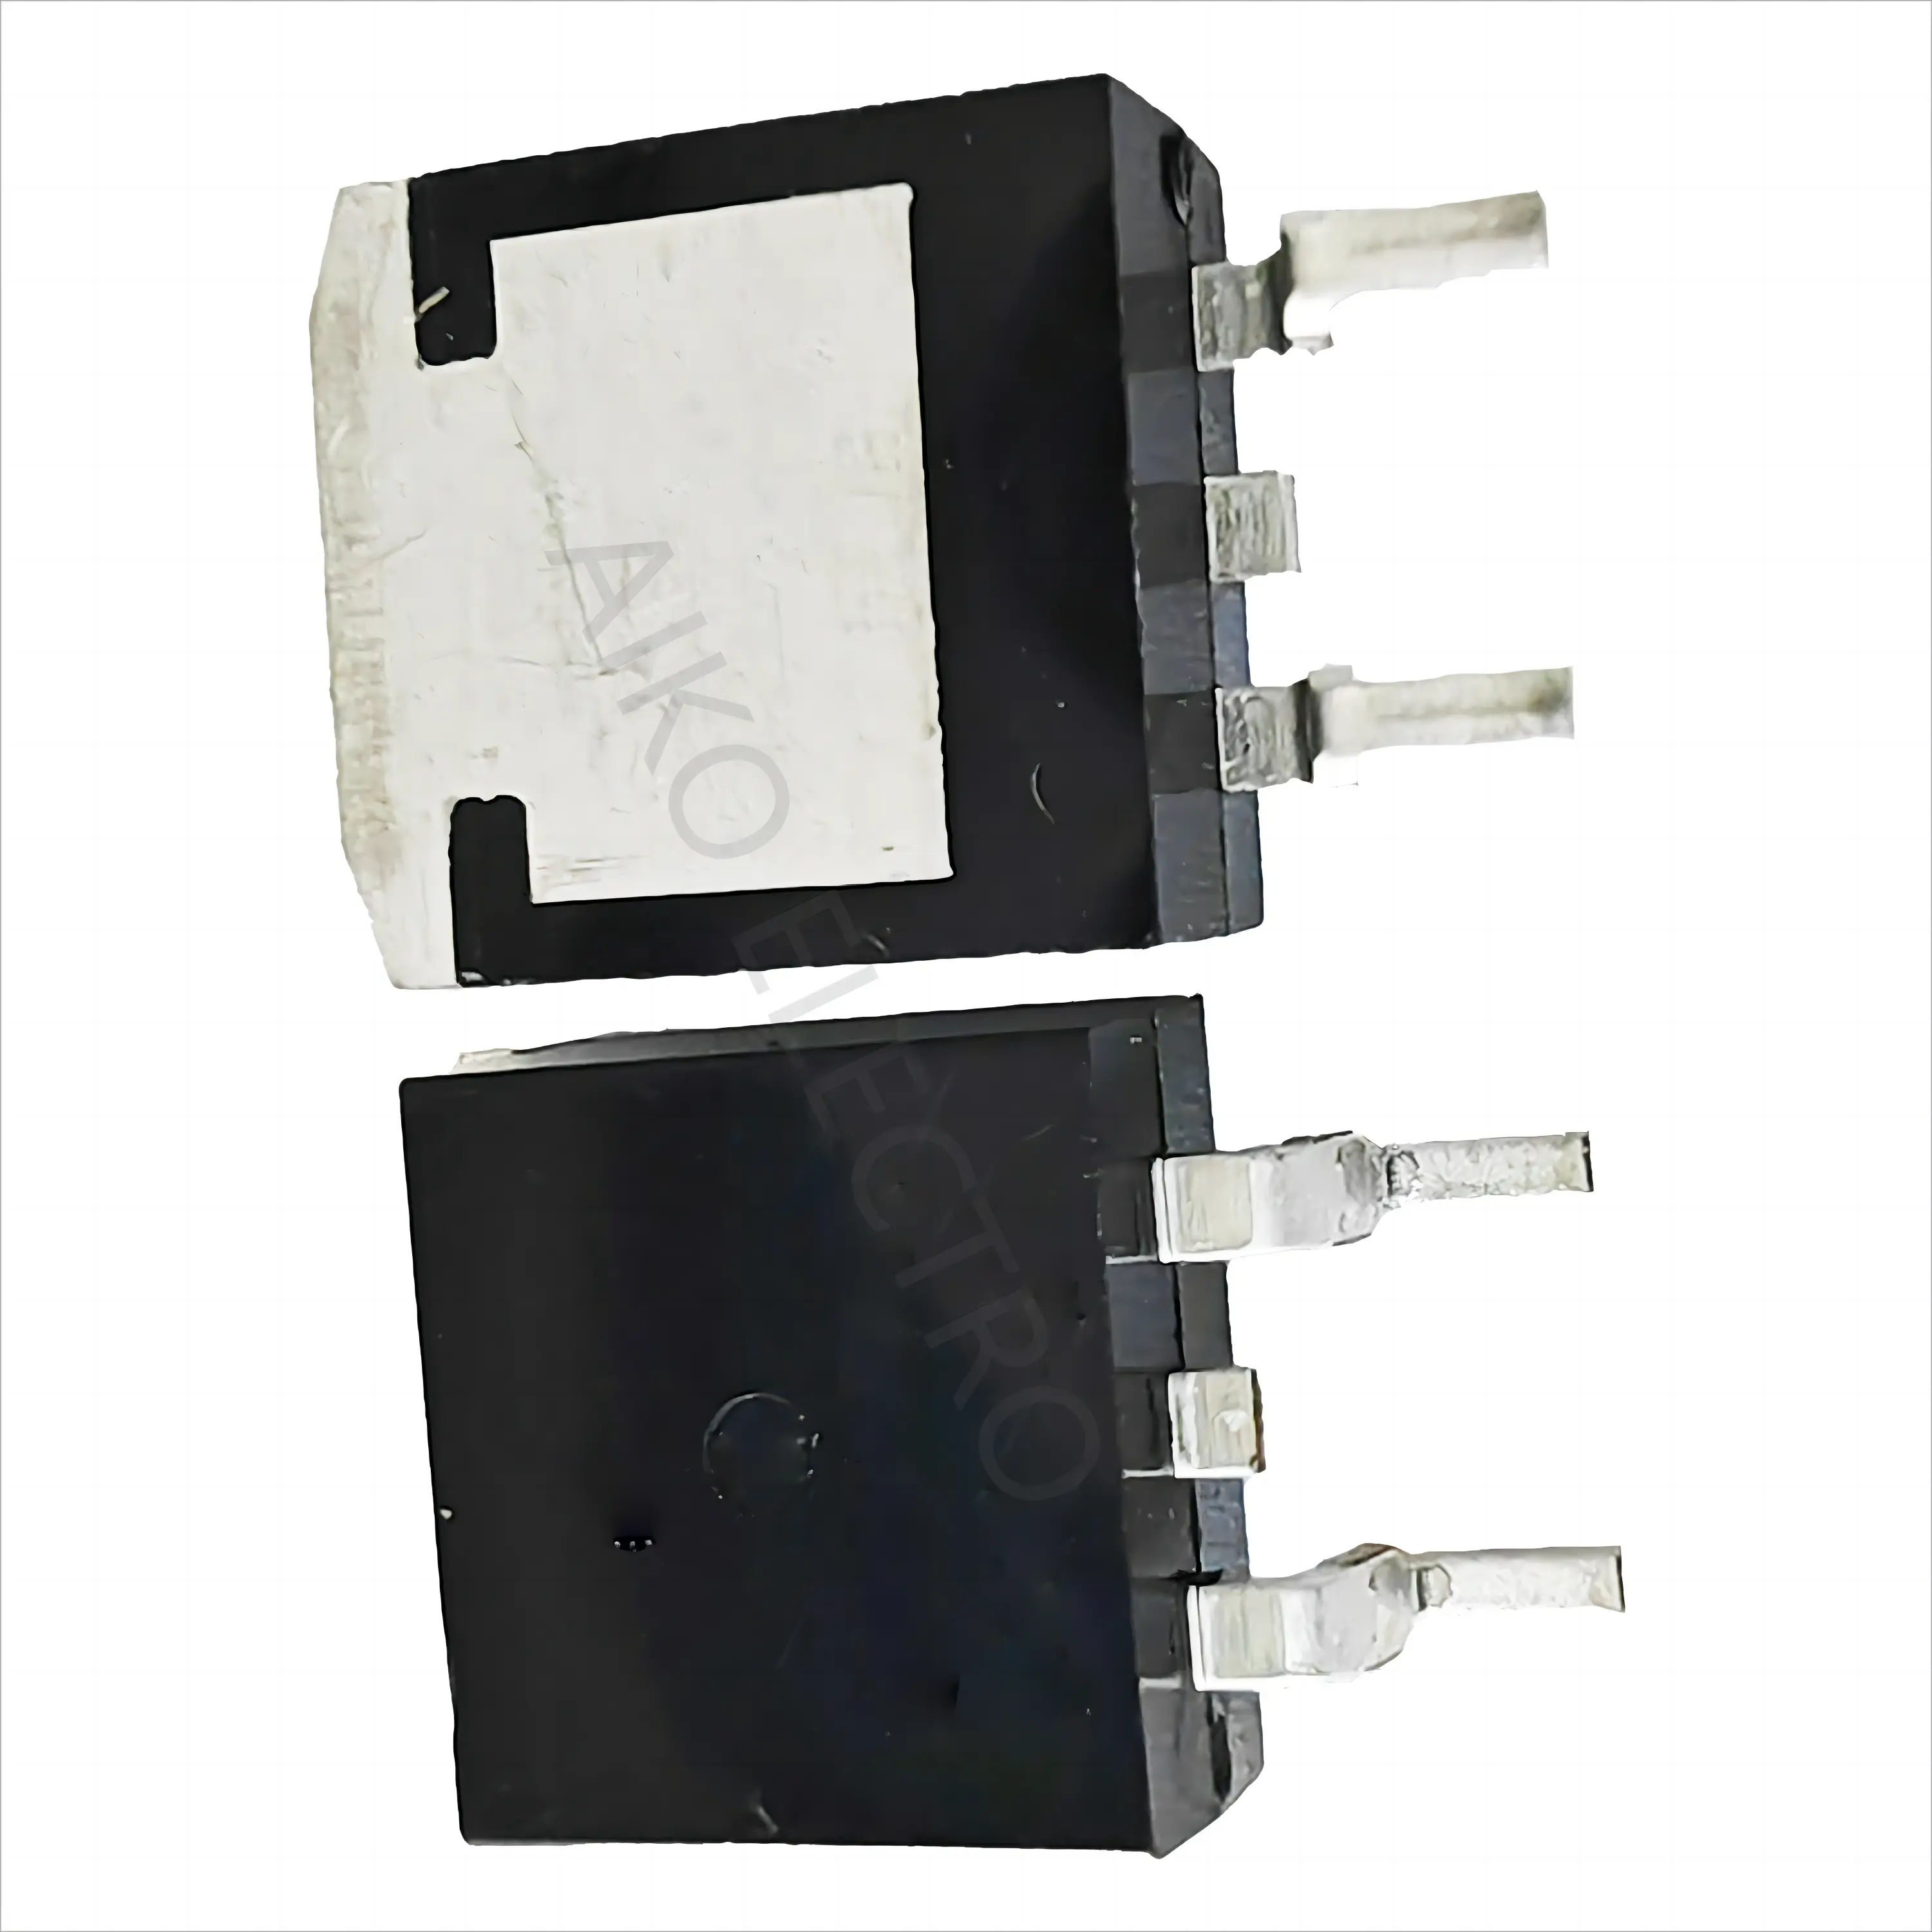 900V 4A MOSFET N-Channel Enhancement Mode Power MOSFET Transistor TO-263 Package For Switched Mode Power Supplies